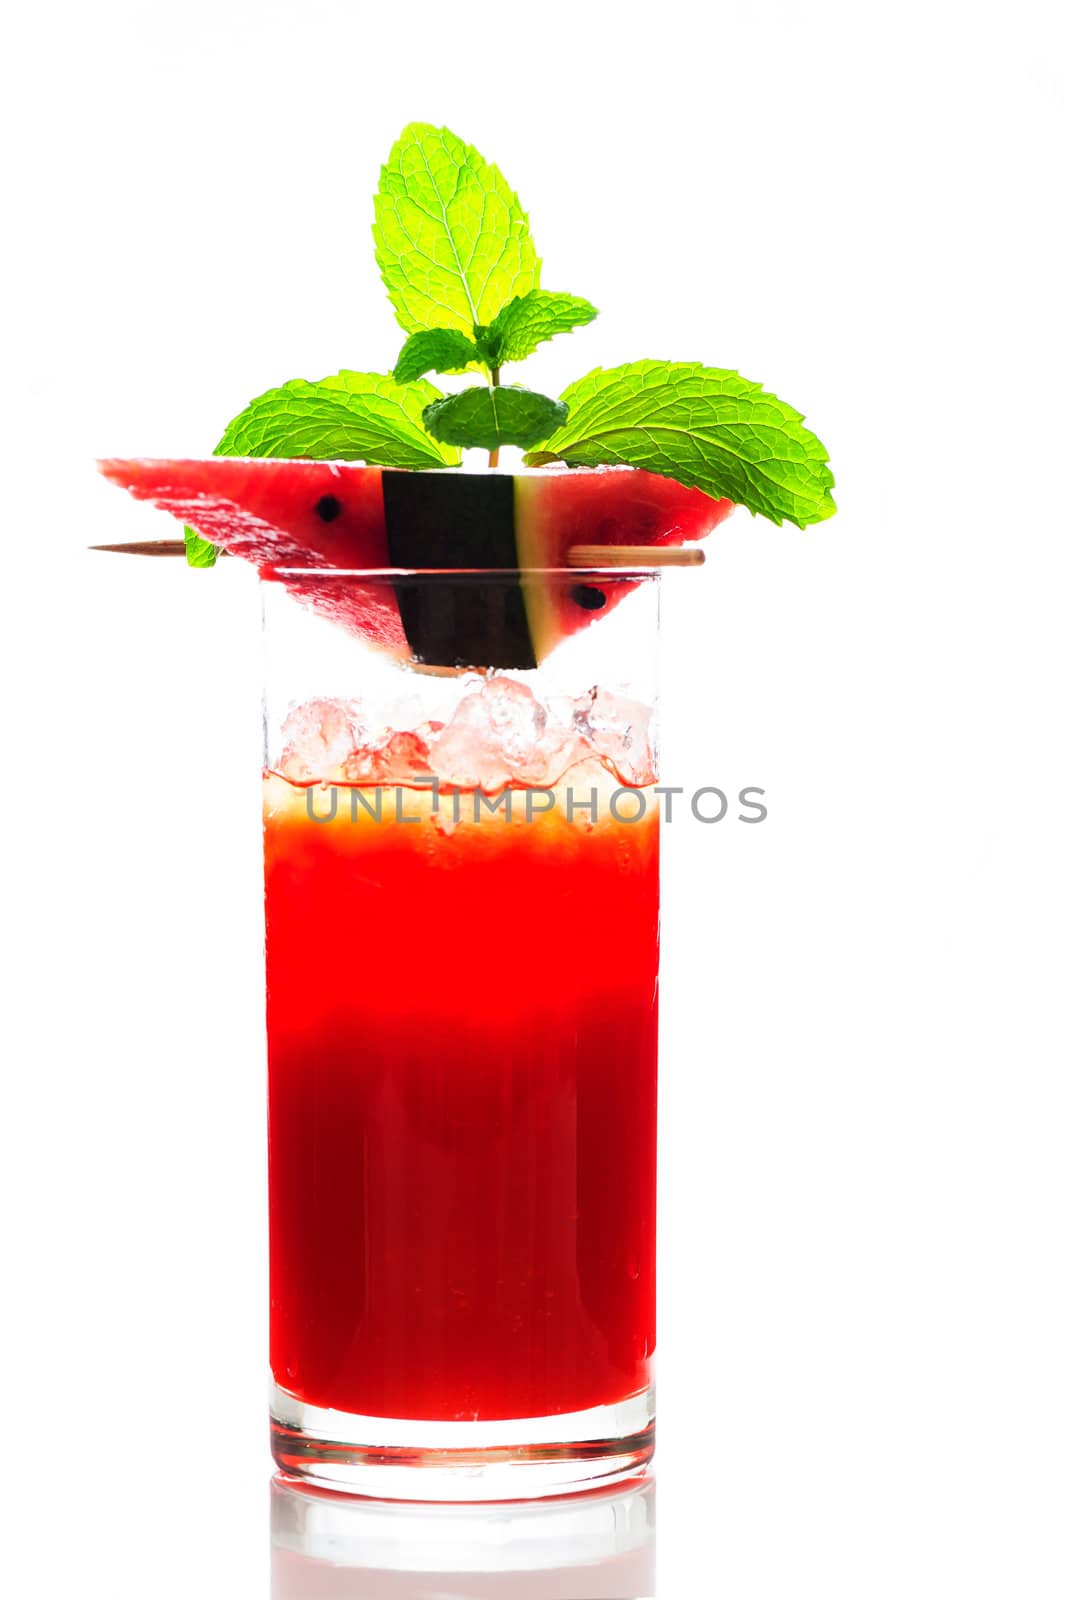 Watermelon smoothie garnished with watermelon slices and mint leaves isolated on white